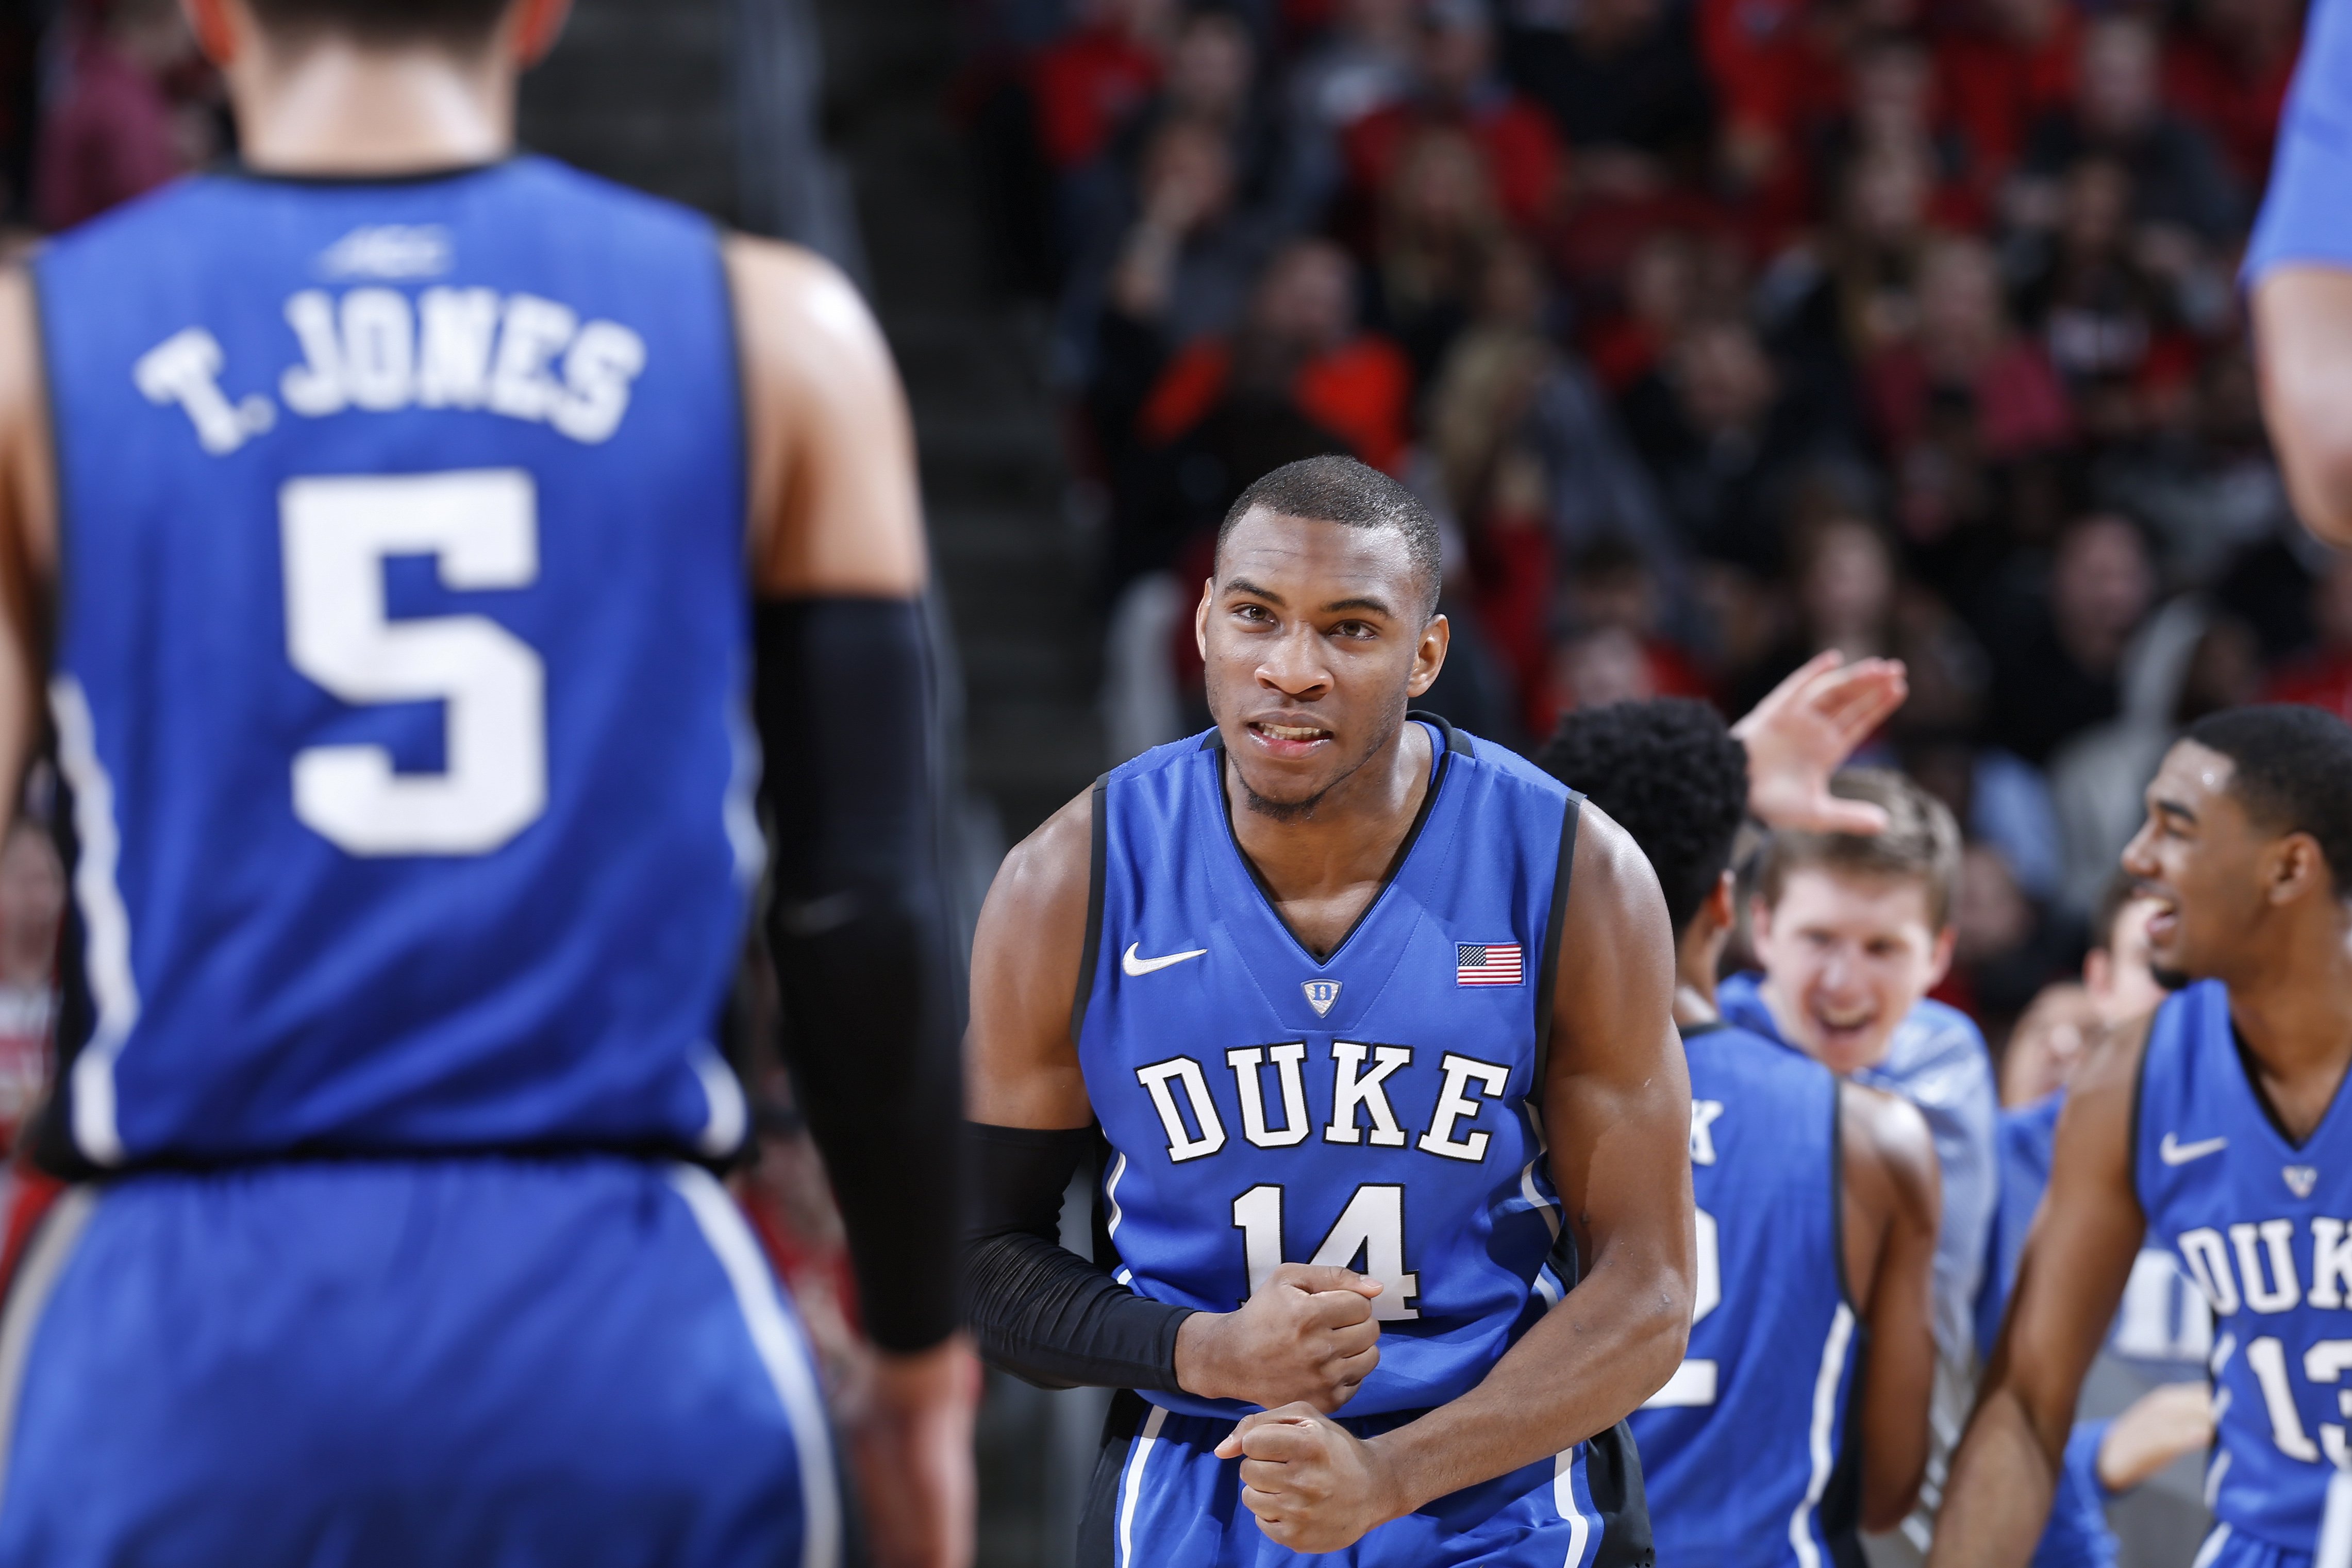 Rasheed Sulaimon of the Duke Blue Devils celebrates against the Louisville Cardinals in the first half of the game at KFC Yum! Center on Jan. 17, 2015 in Louisville, Kentucky.